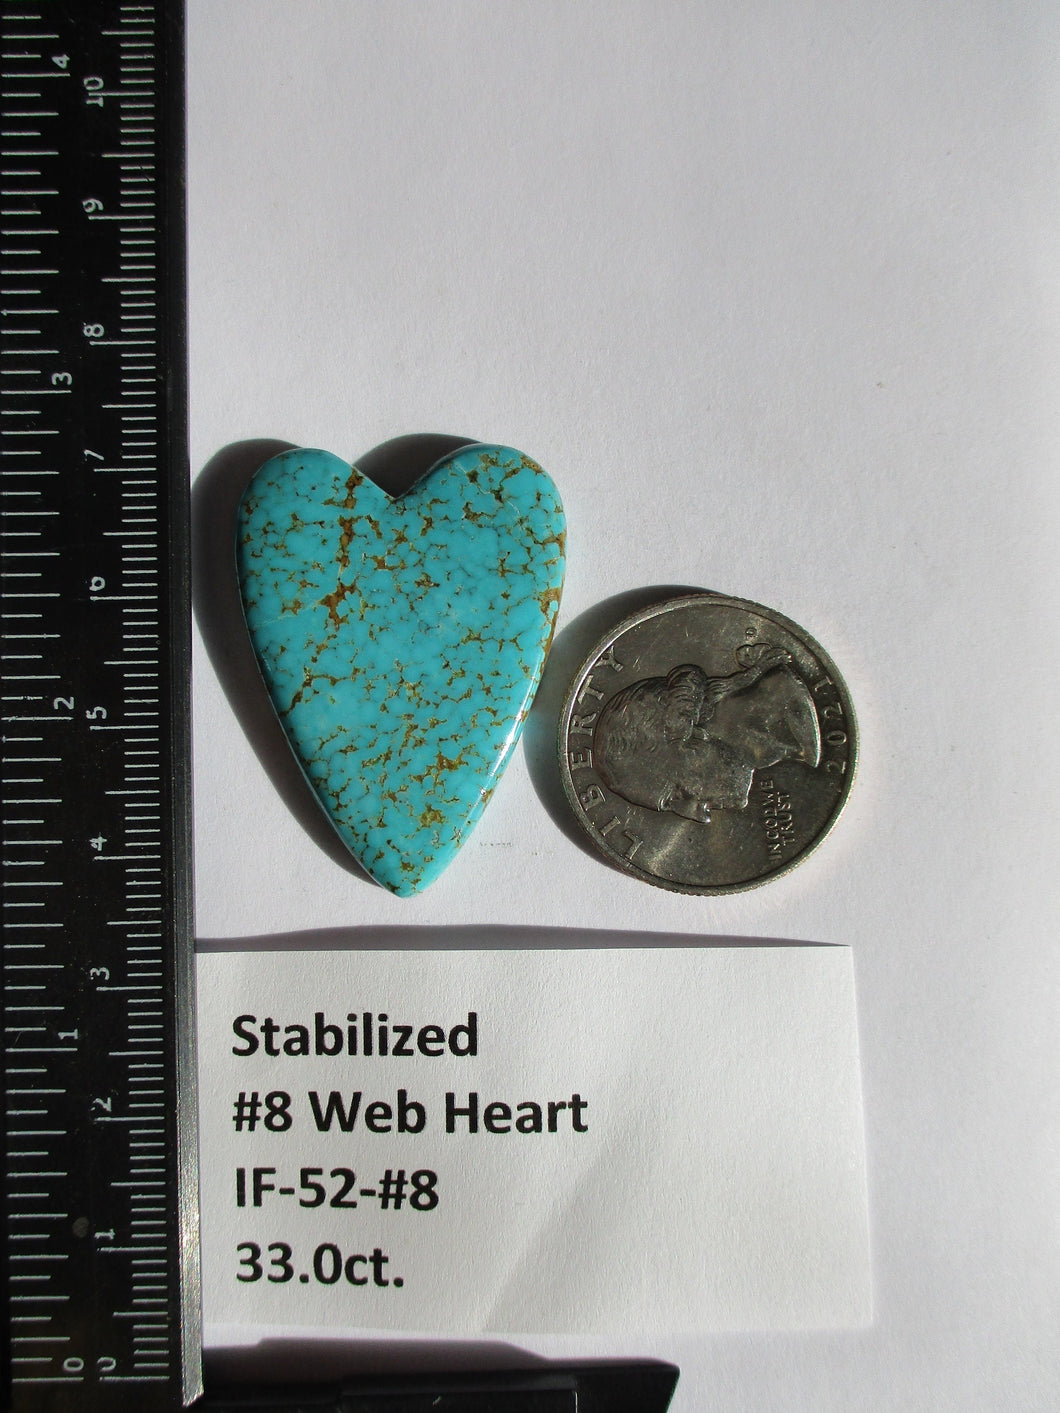 33.0 ct (36.5x27x4.5 mm) Stabilized #8 Web Turquoise Heart Cabochon Gemstone, IF 52